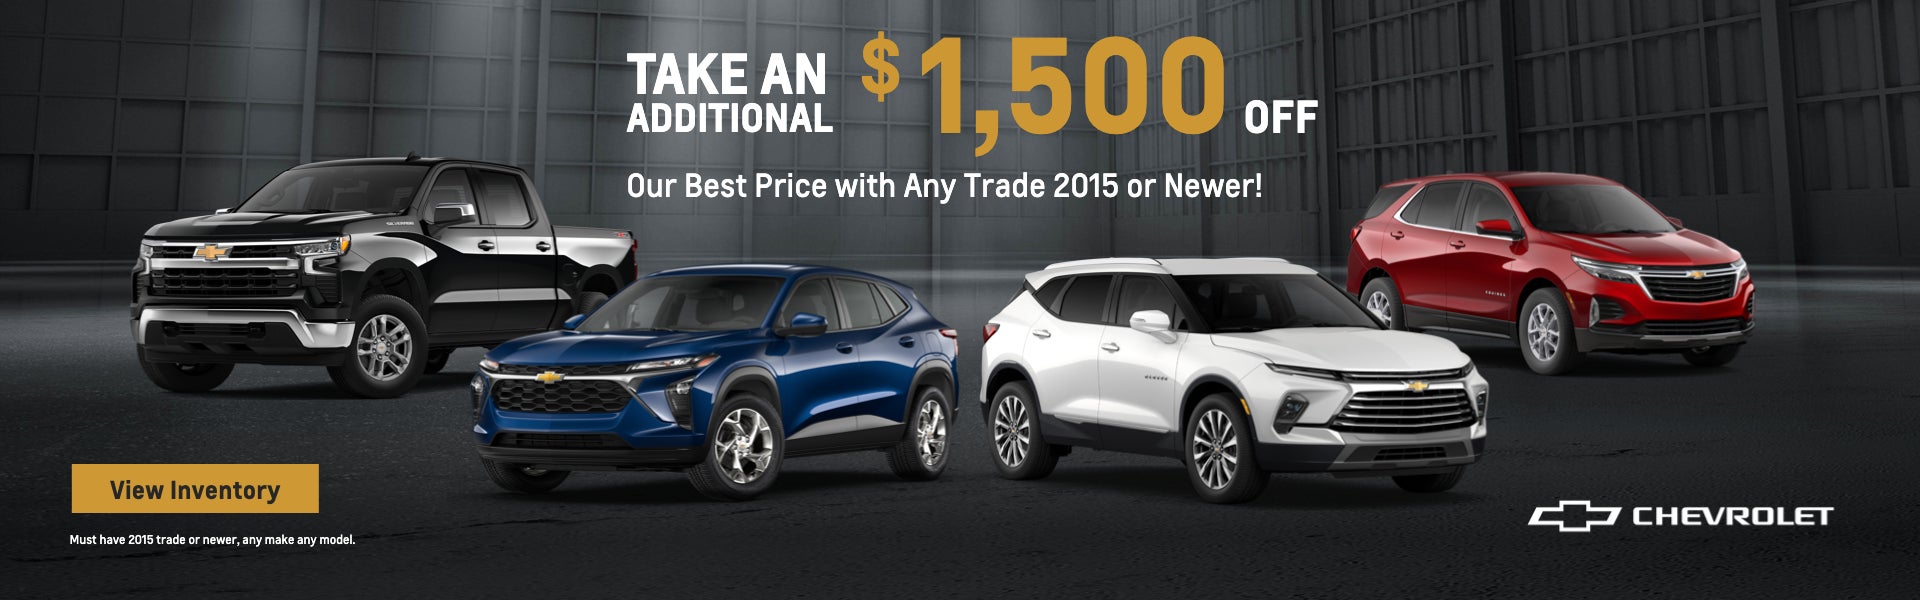 Take an Additional $1,500 Off